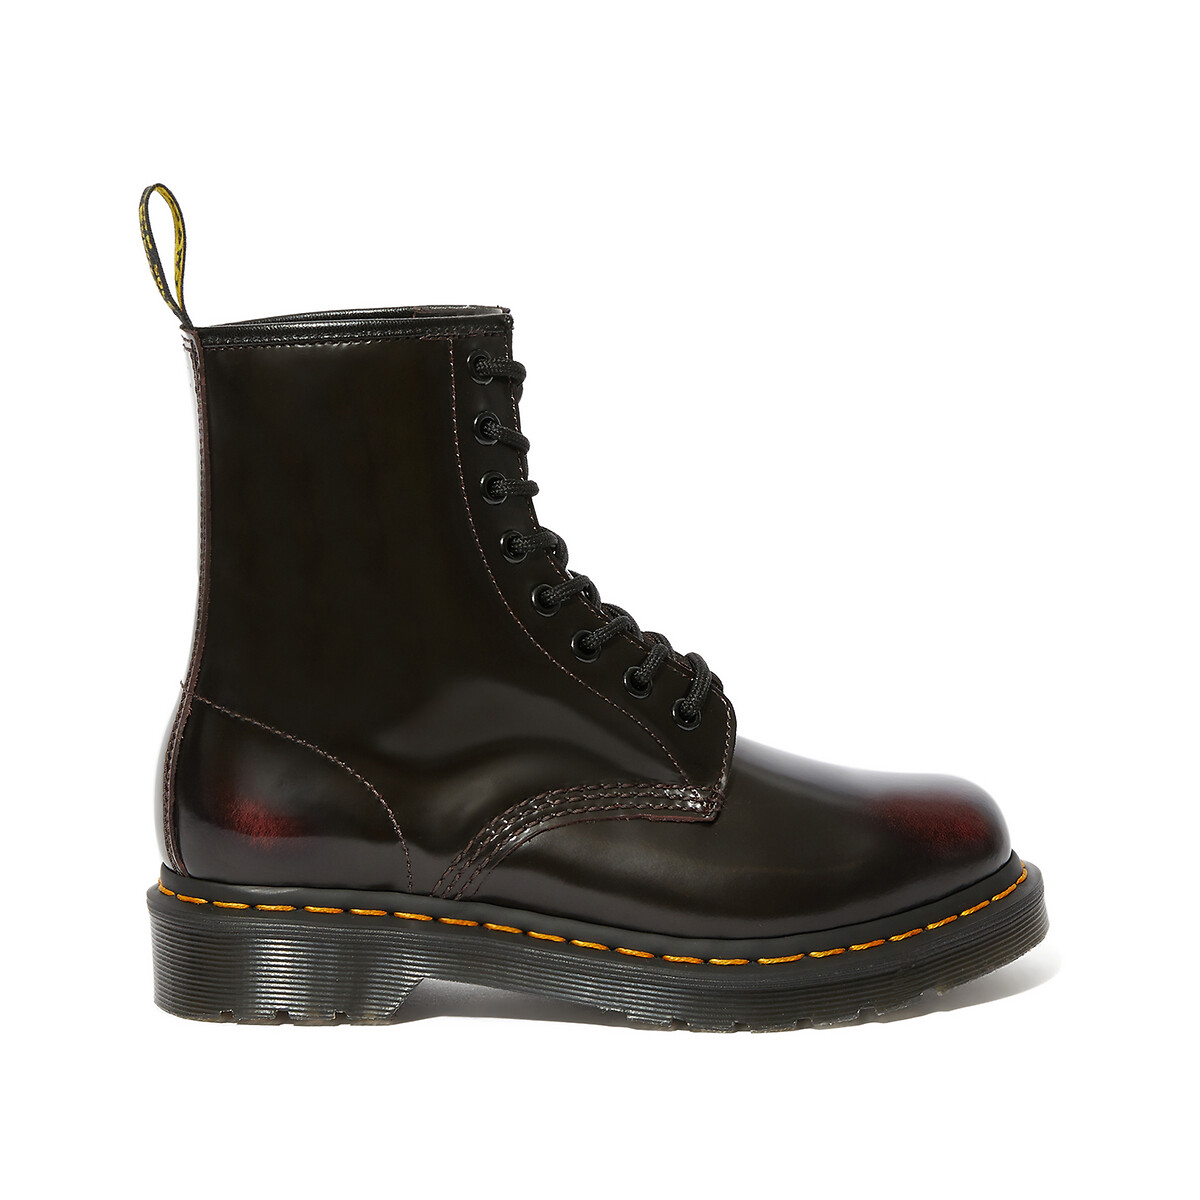 1460 pascal ankle boots in leather , burgundy red, Dr Martens | La Redoute